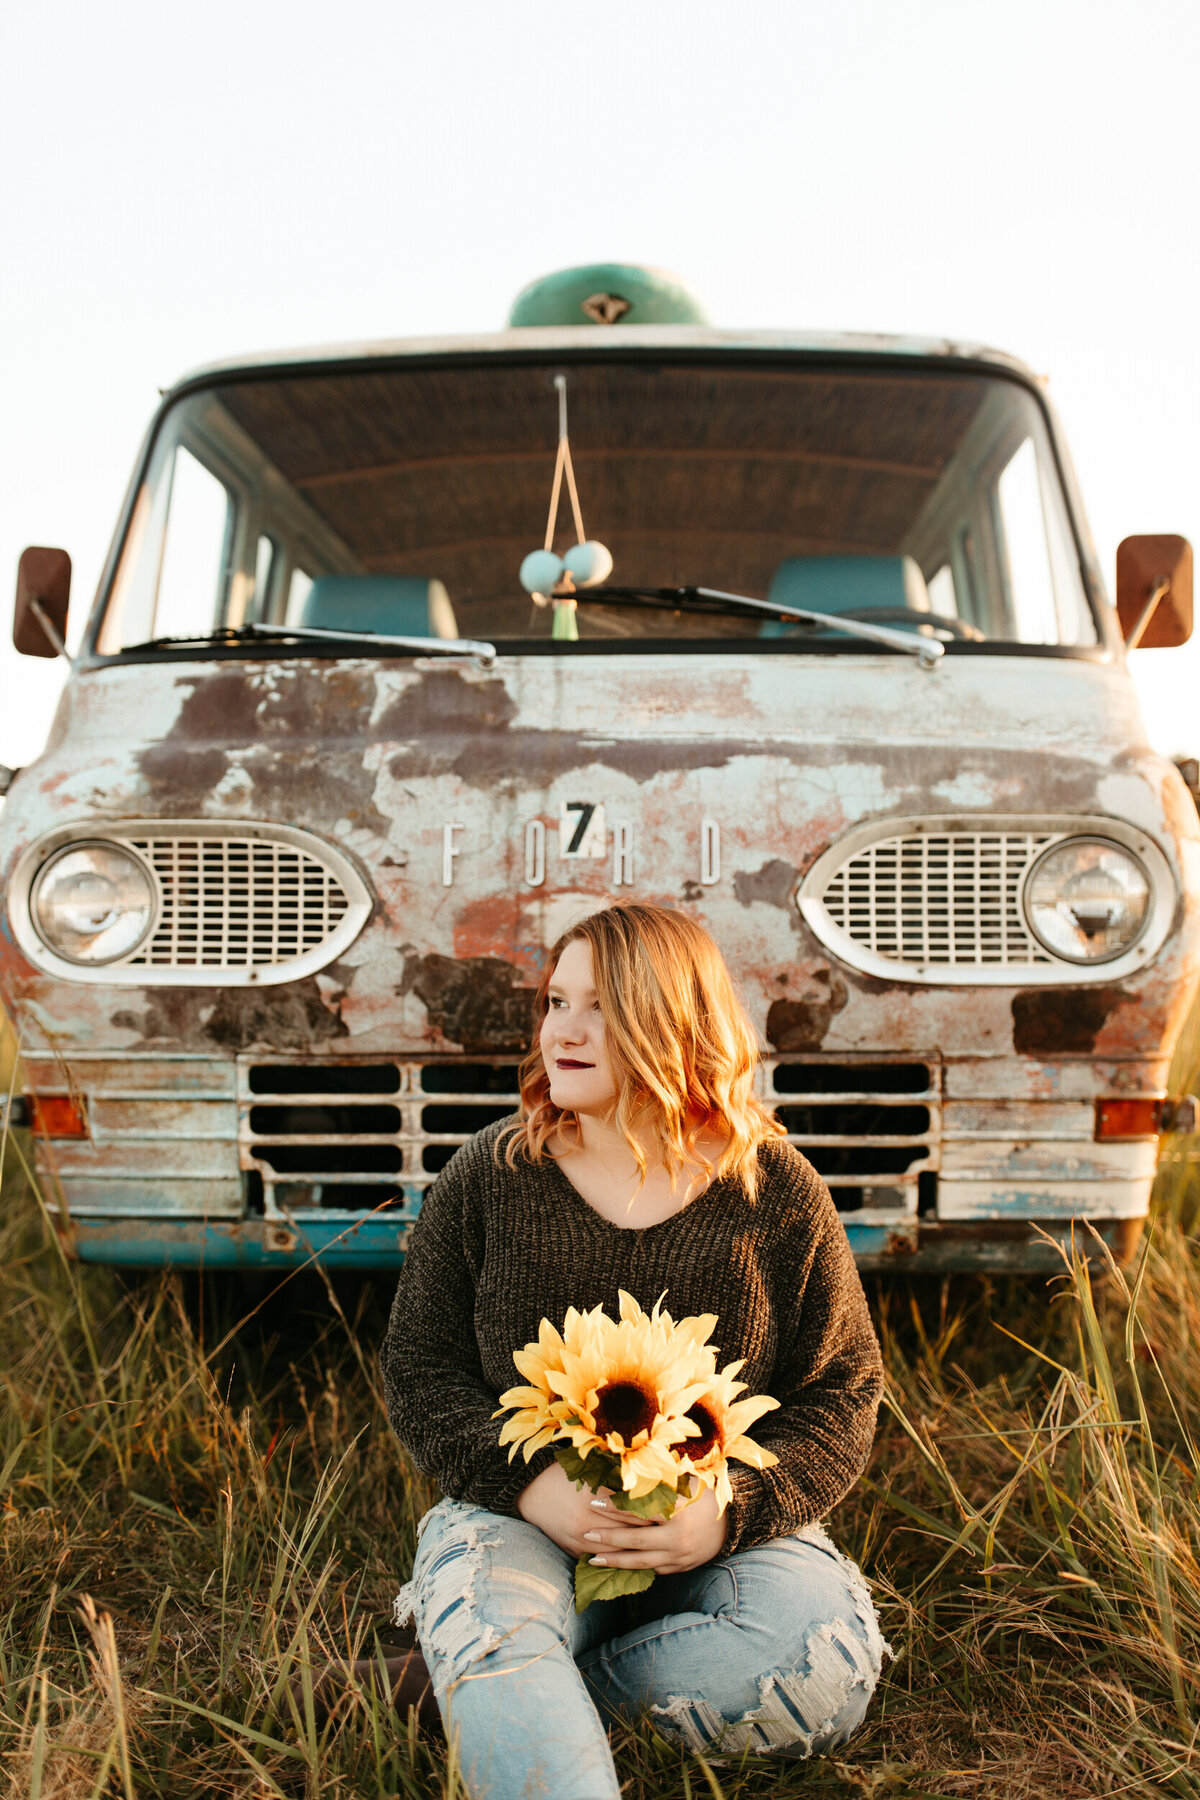 High school senior sitting on the ground in front of an old vintage hippie van and holding sunflowers